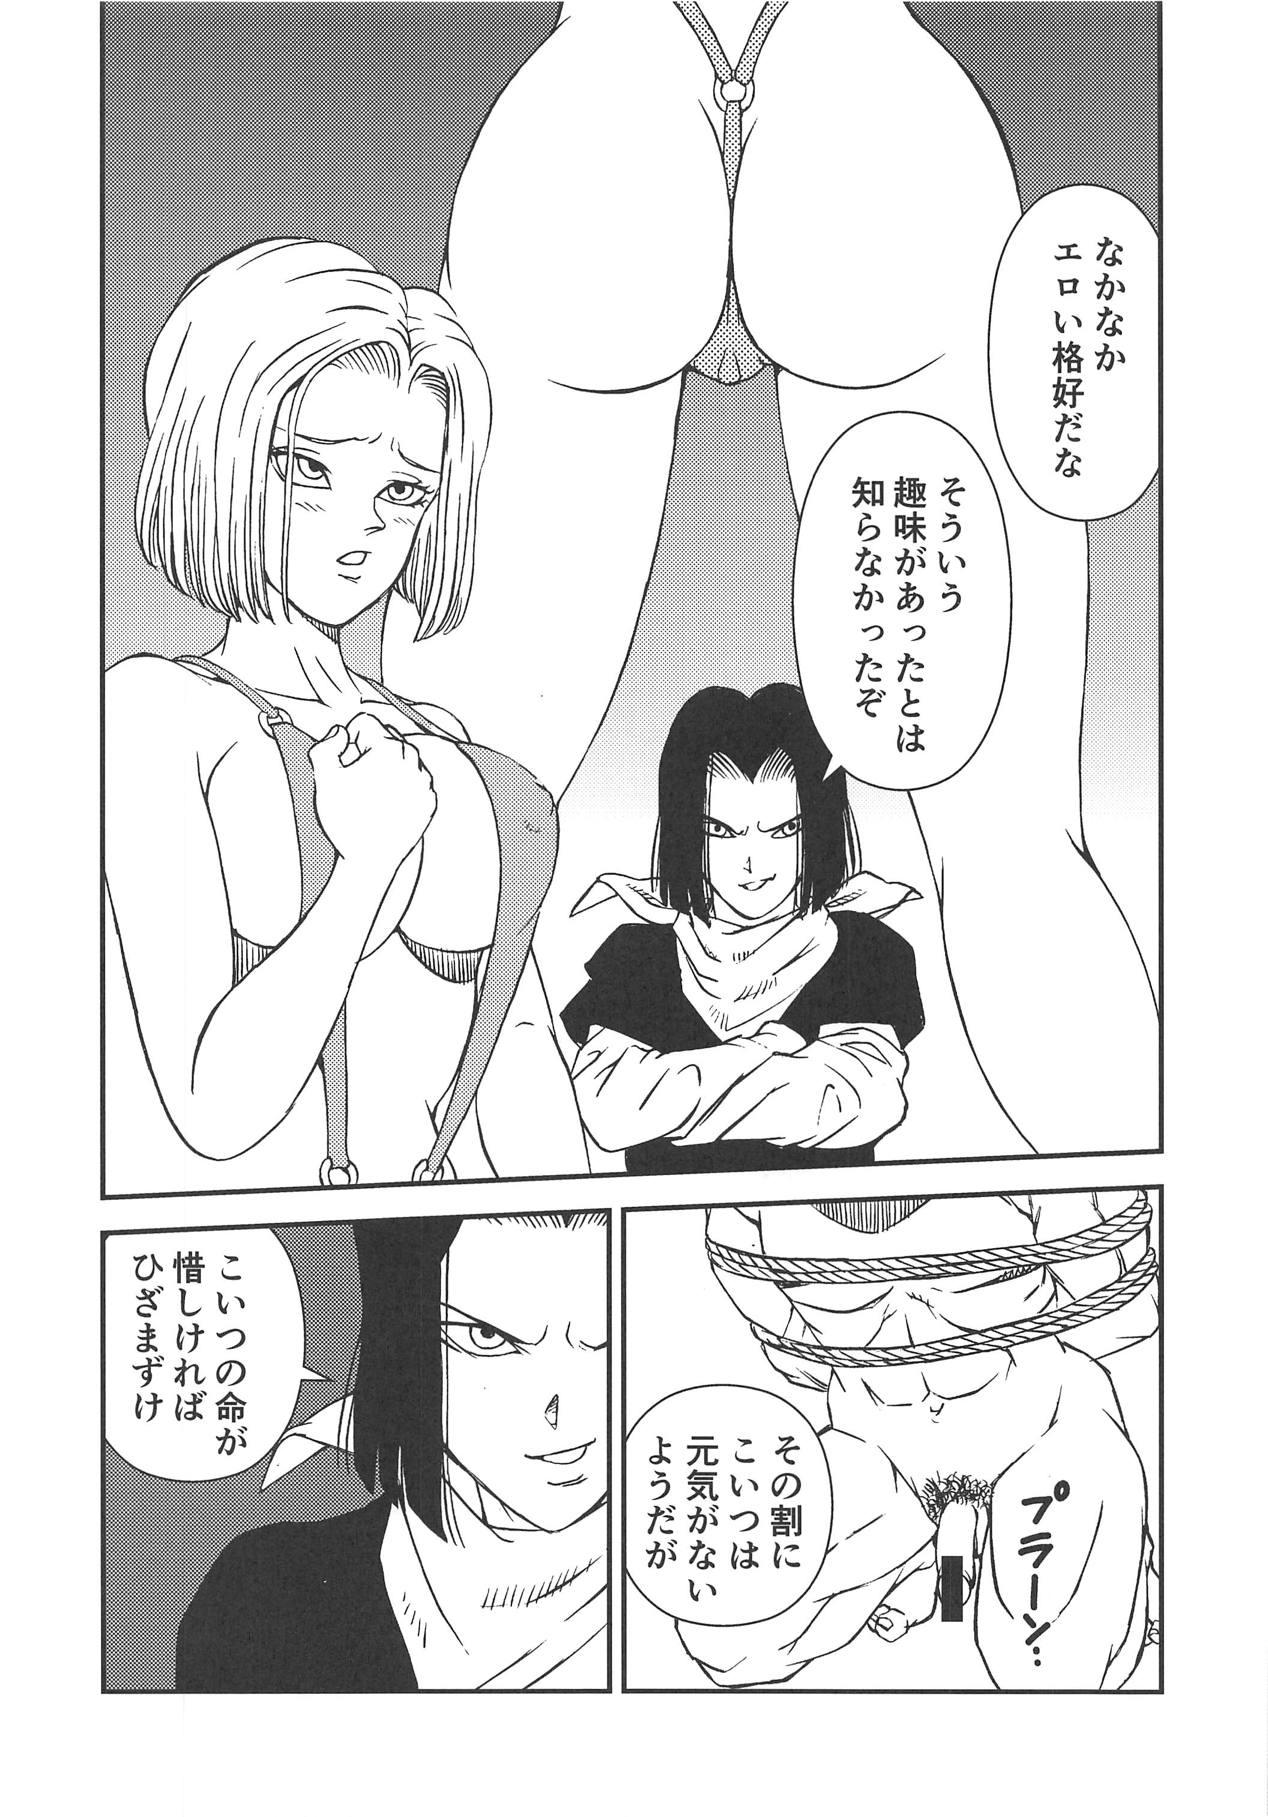 Blowing 18+ 3 - Dragon ball z Big Booty - Page 6